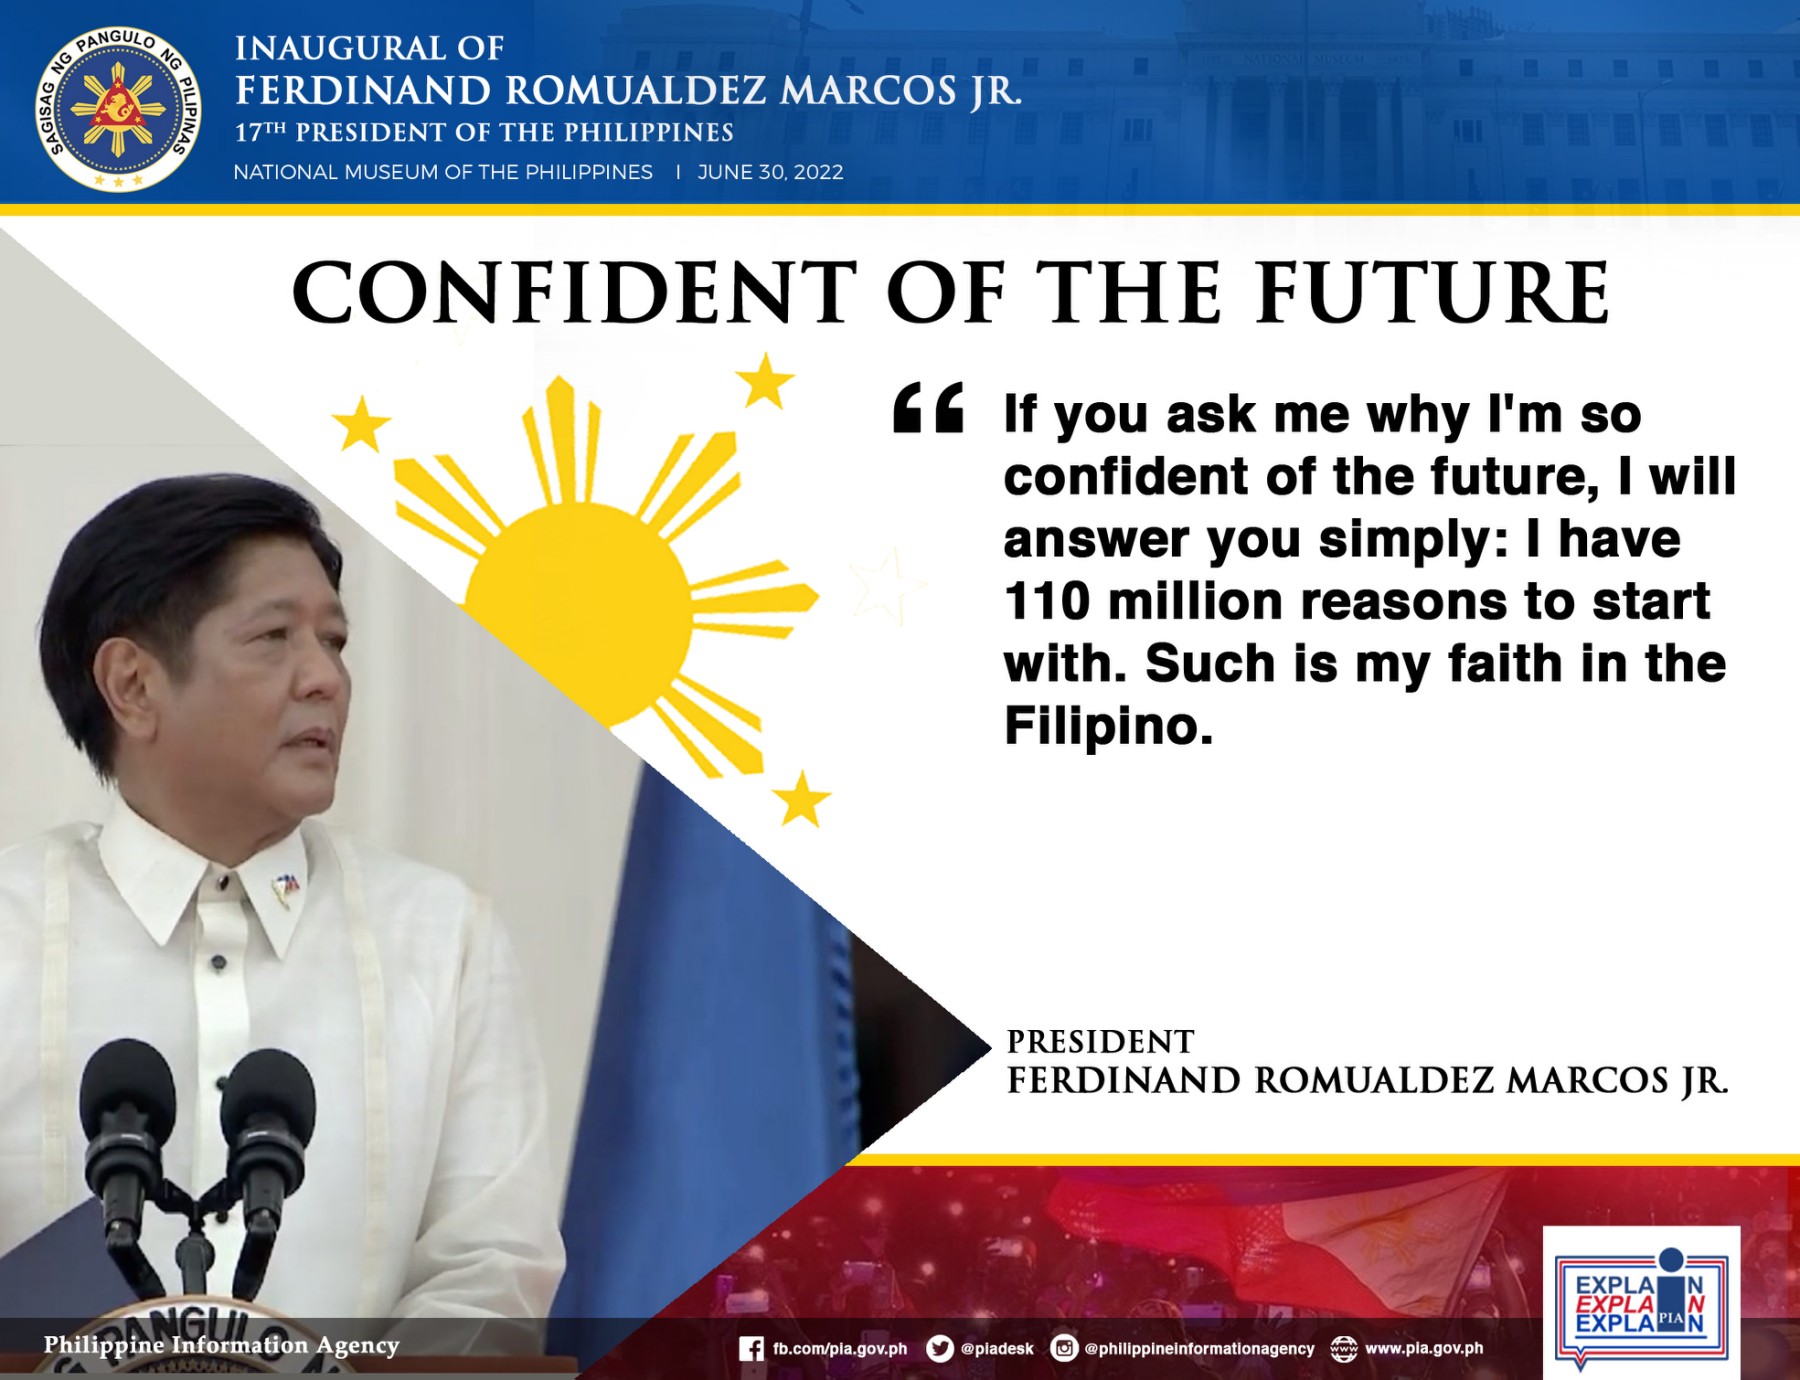 President Ferdinand Marcos Jr. is confident of the country’s future